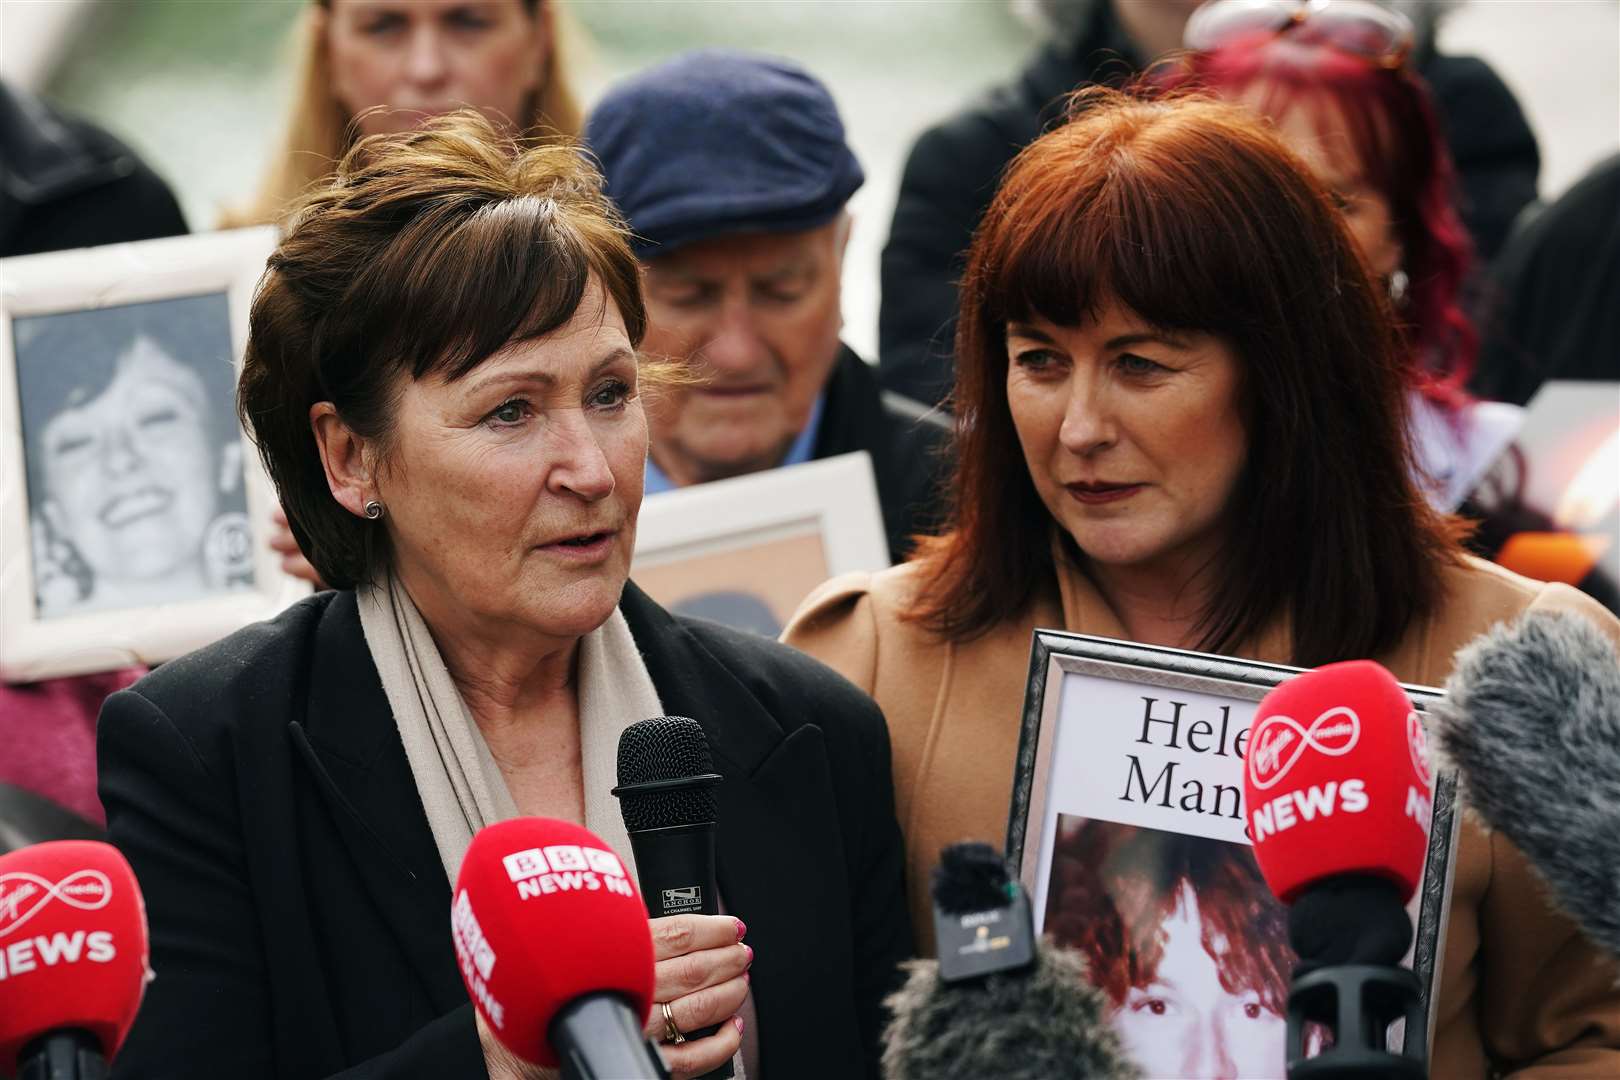 Susan Behan, left, said justice had been served (Brian Lawless/PA)